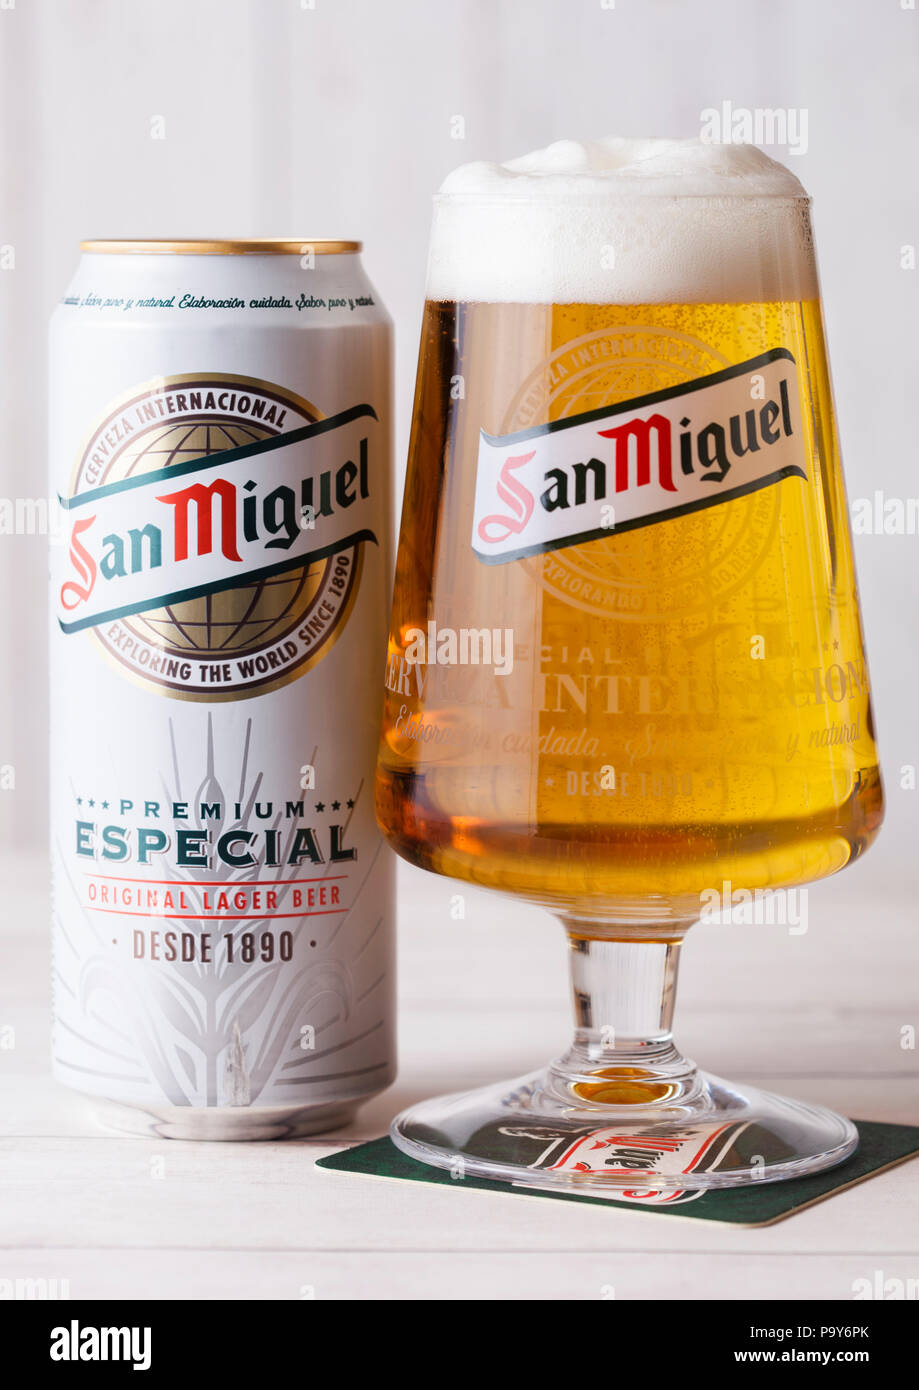 LONDON, UK - APRIL 27, 2018: Aluminium can of San Miguel lager beer on  wooden background with original glass. The San Miguel brand of beer is the  lead Stock Photo - Alamy